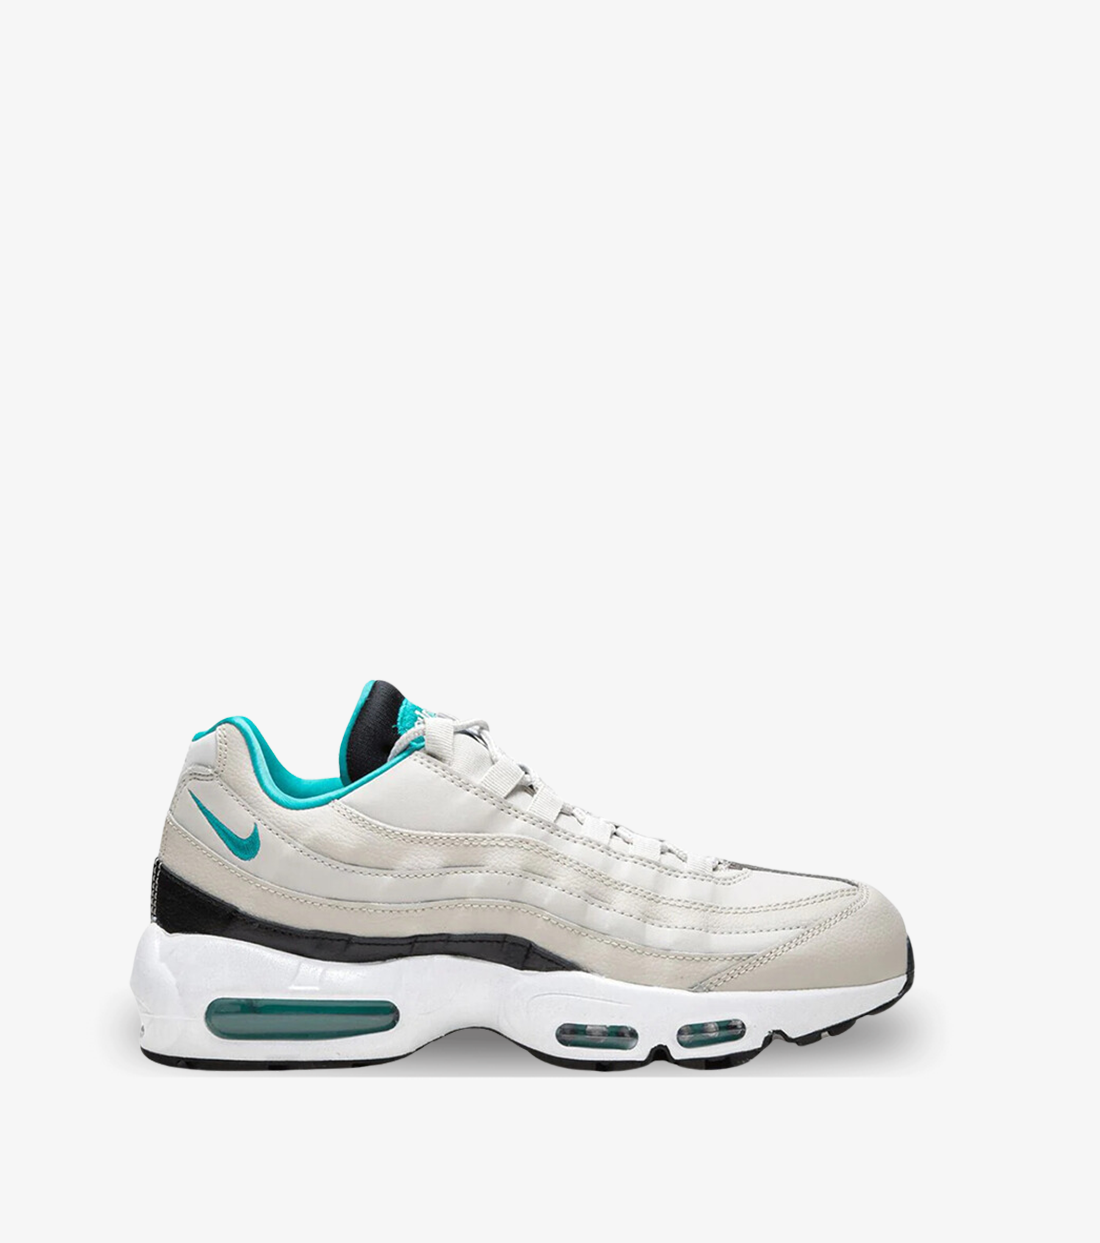 Air Max 95 Sport Turquoise